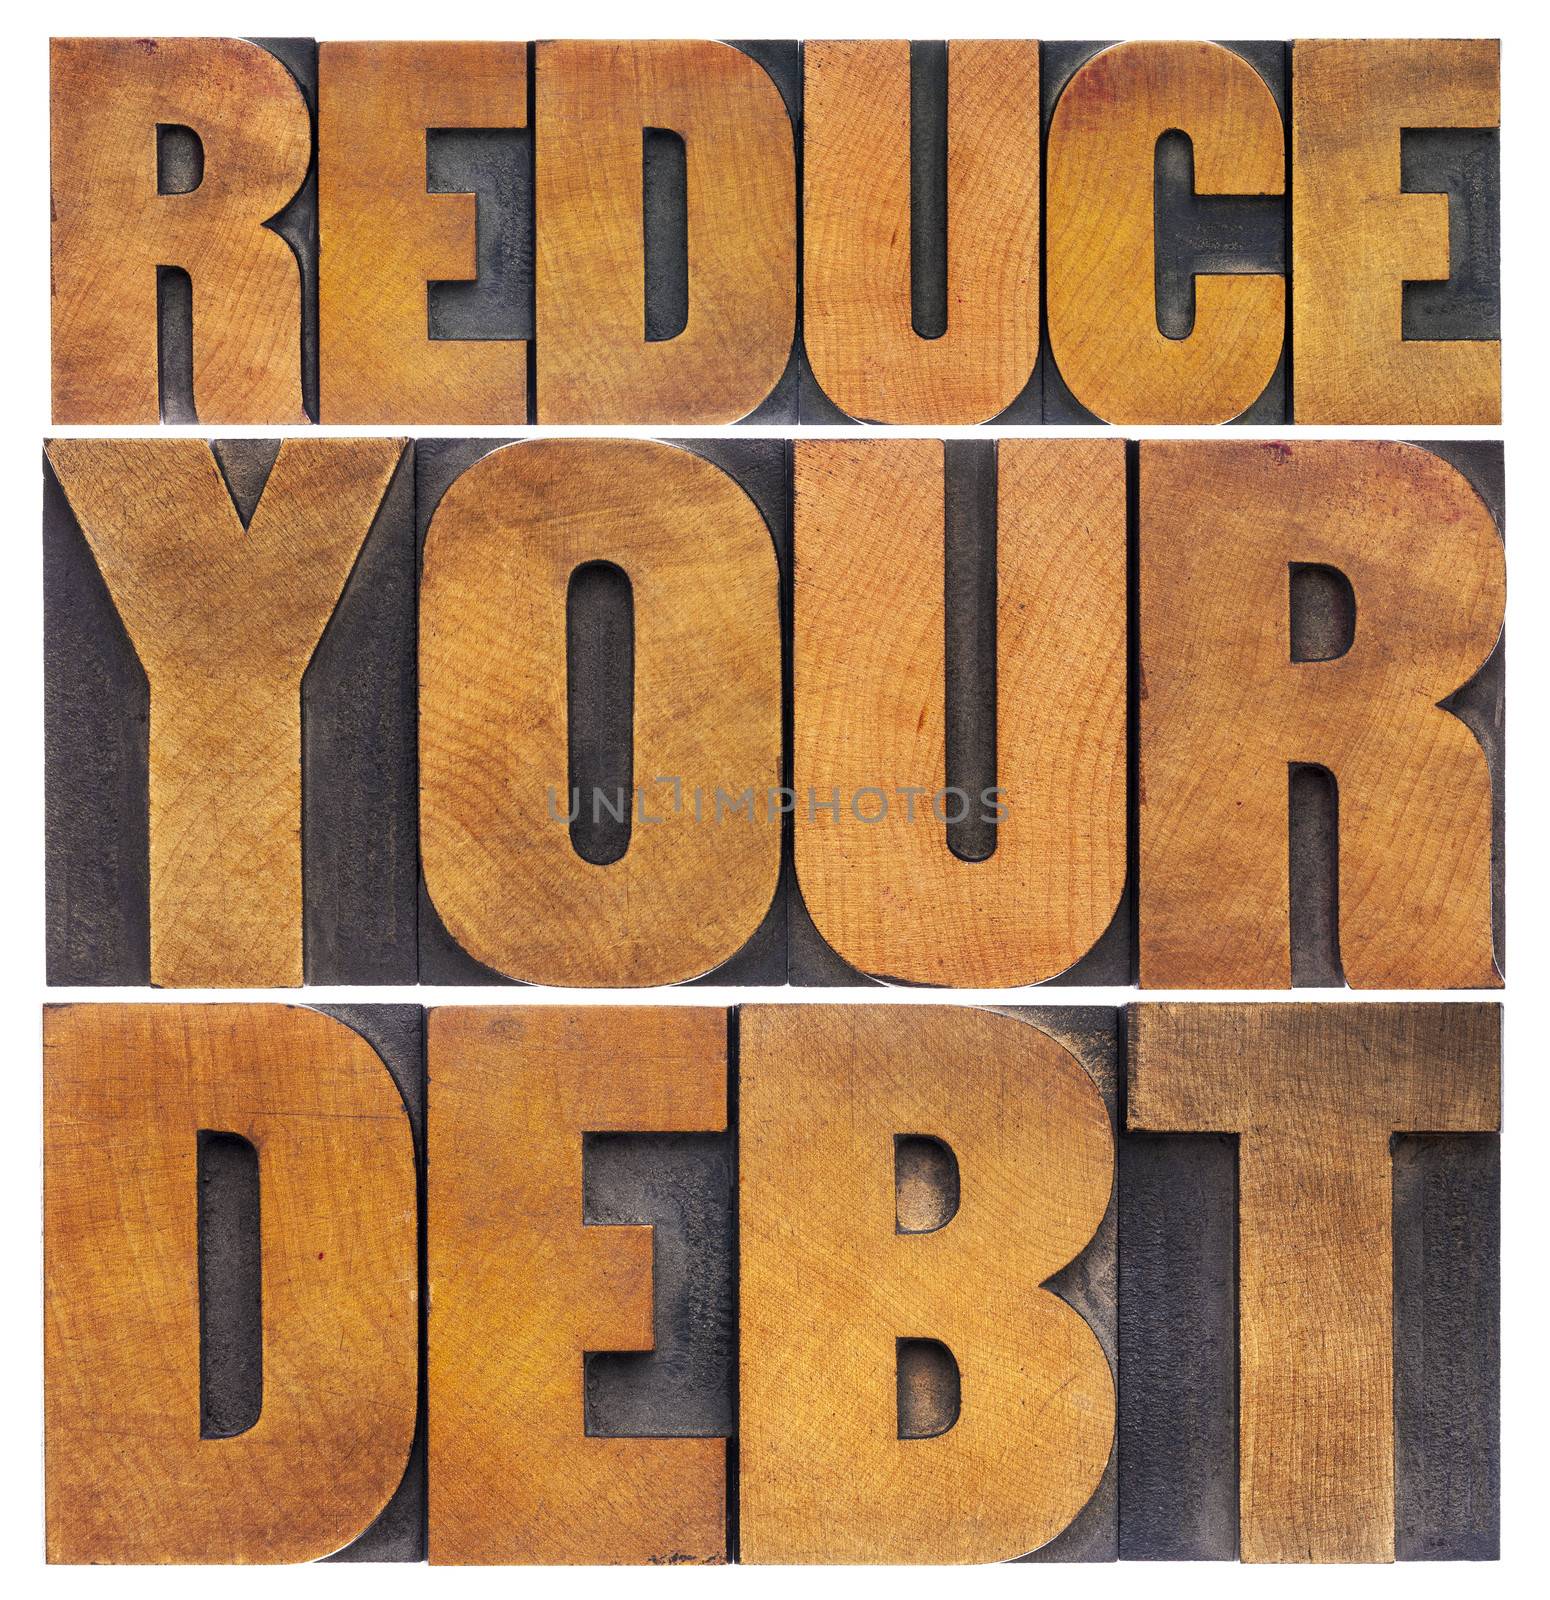 reduce your debt - financial concept - isolated text in vintage letterpress wood type